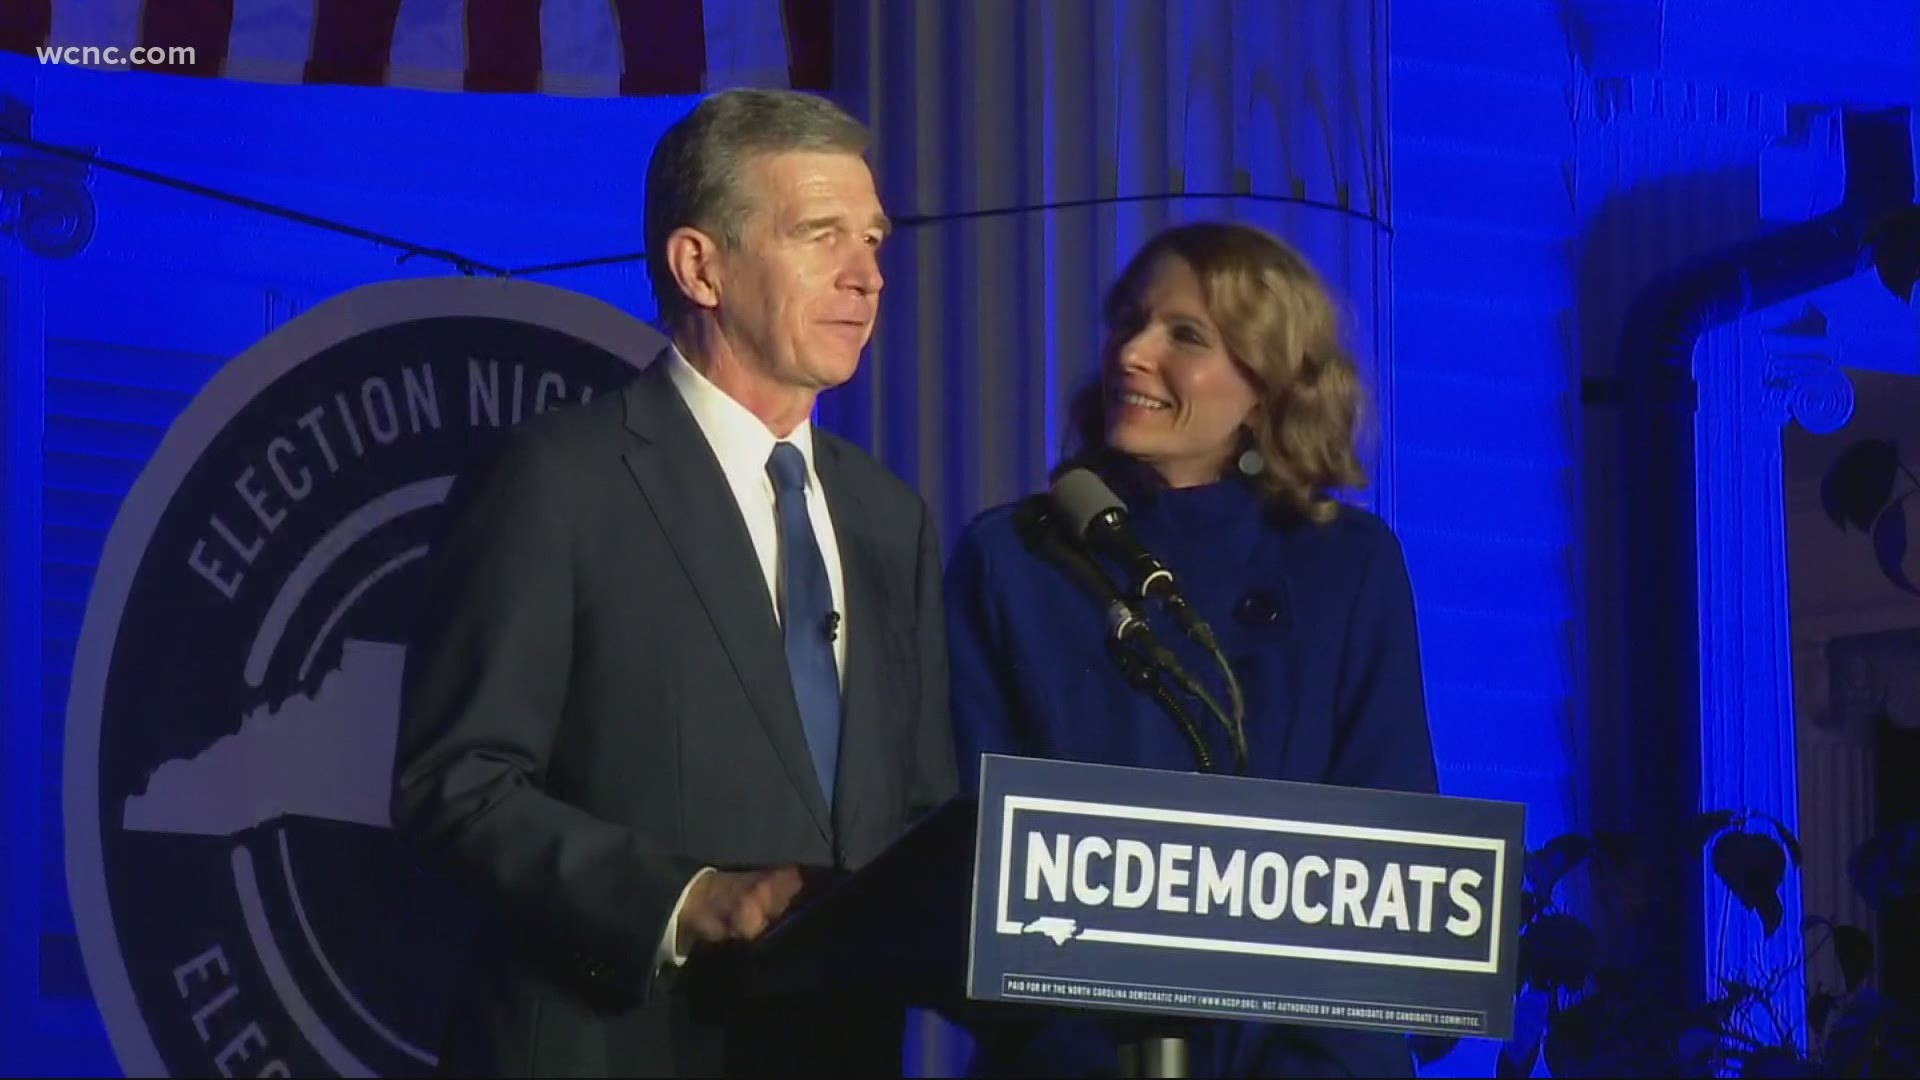 Governor Cooper gave his acceptance speech after the results came in Tuesday night.